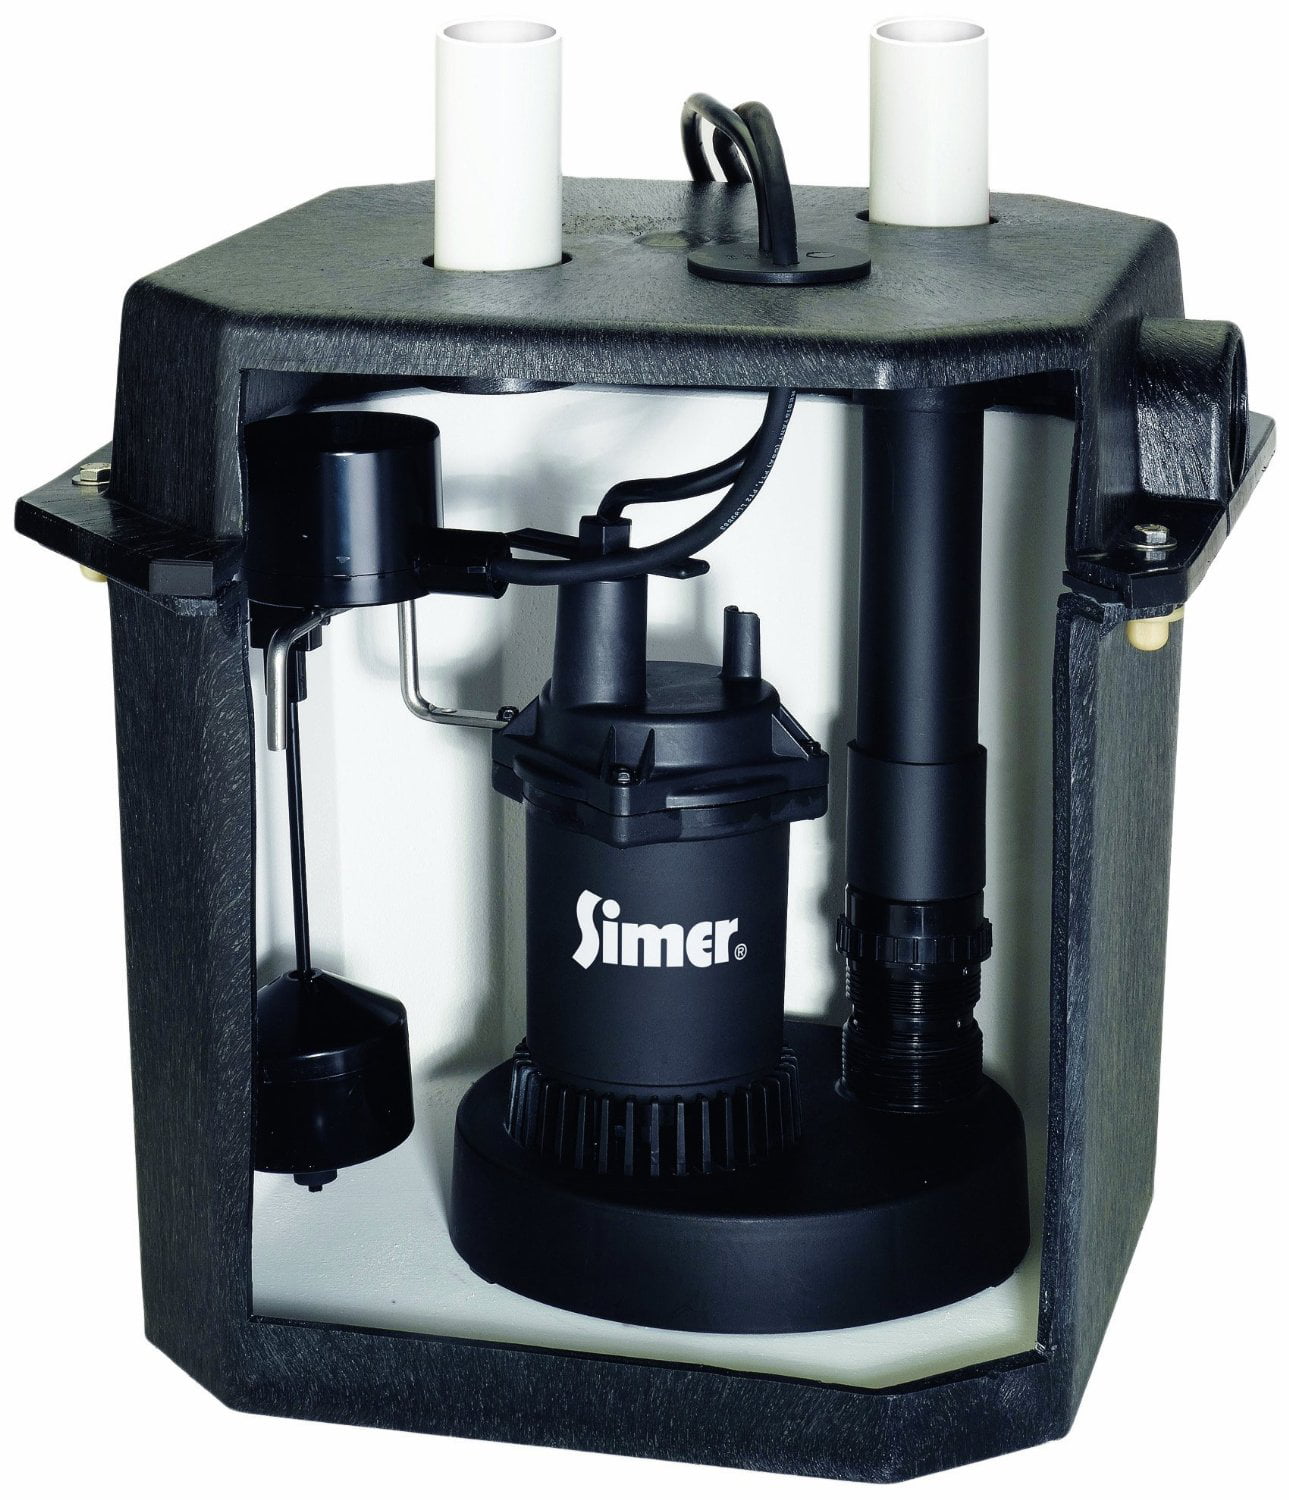 Simer 2925B Sump/Laundry Sink Pump for sale online